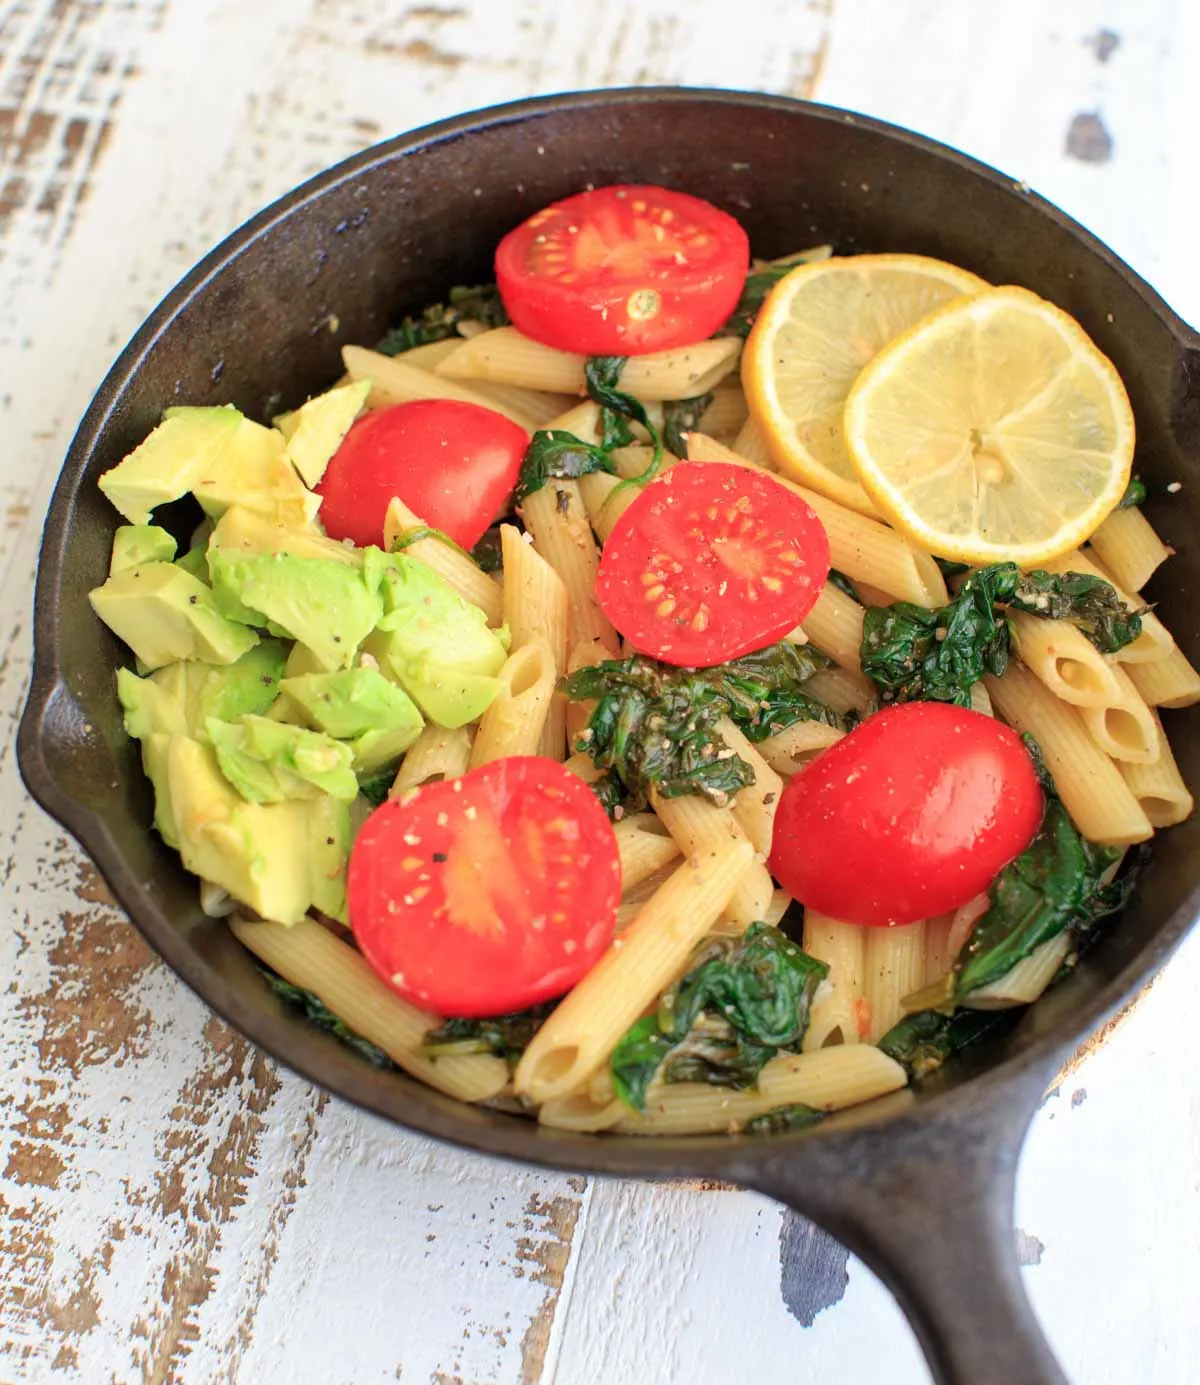 Lemon Spinach Pasta with lemon slices, tomatoes and avocado in a cast iron pan